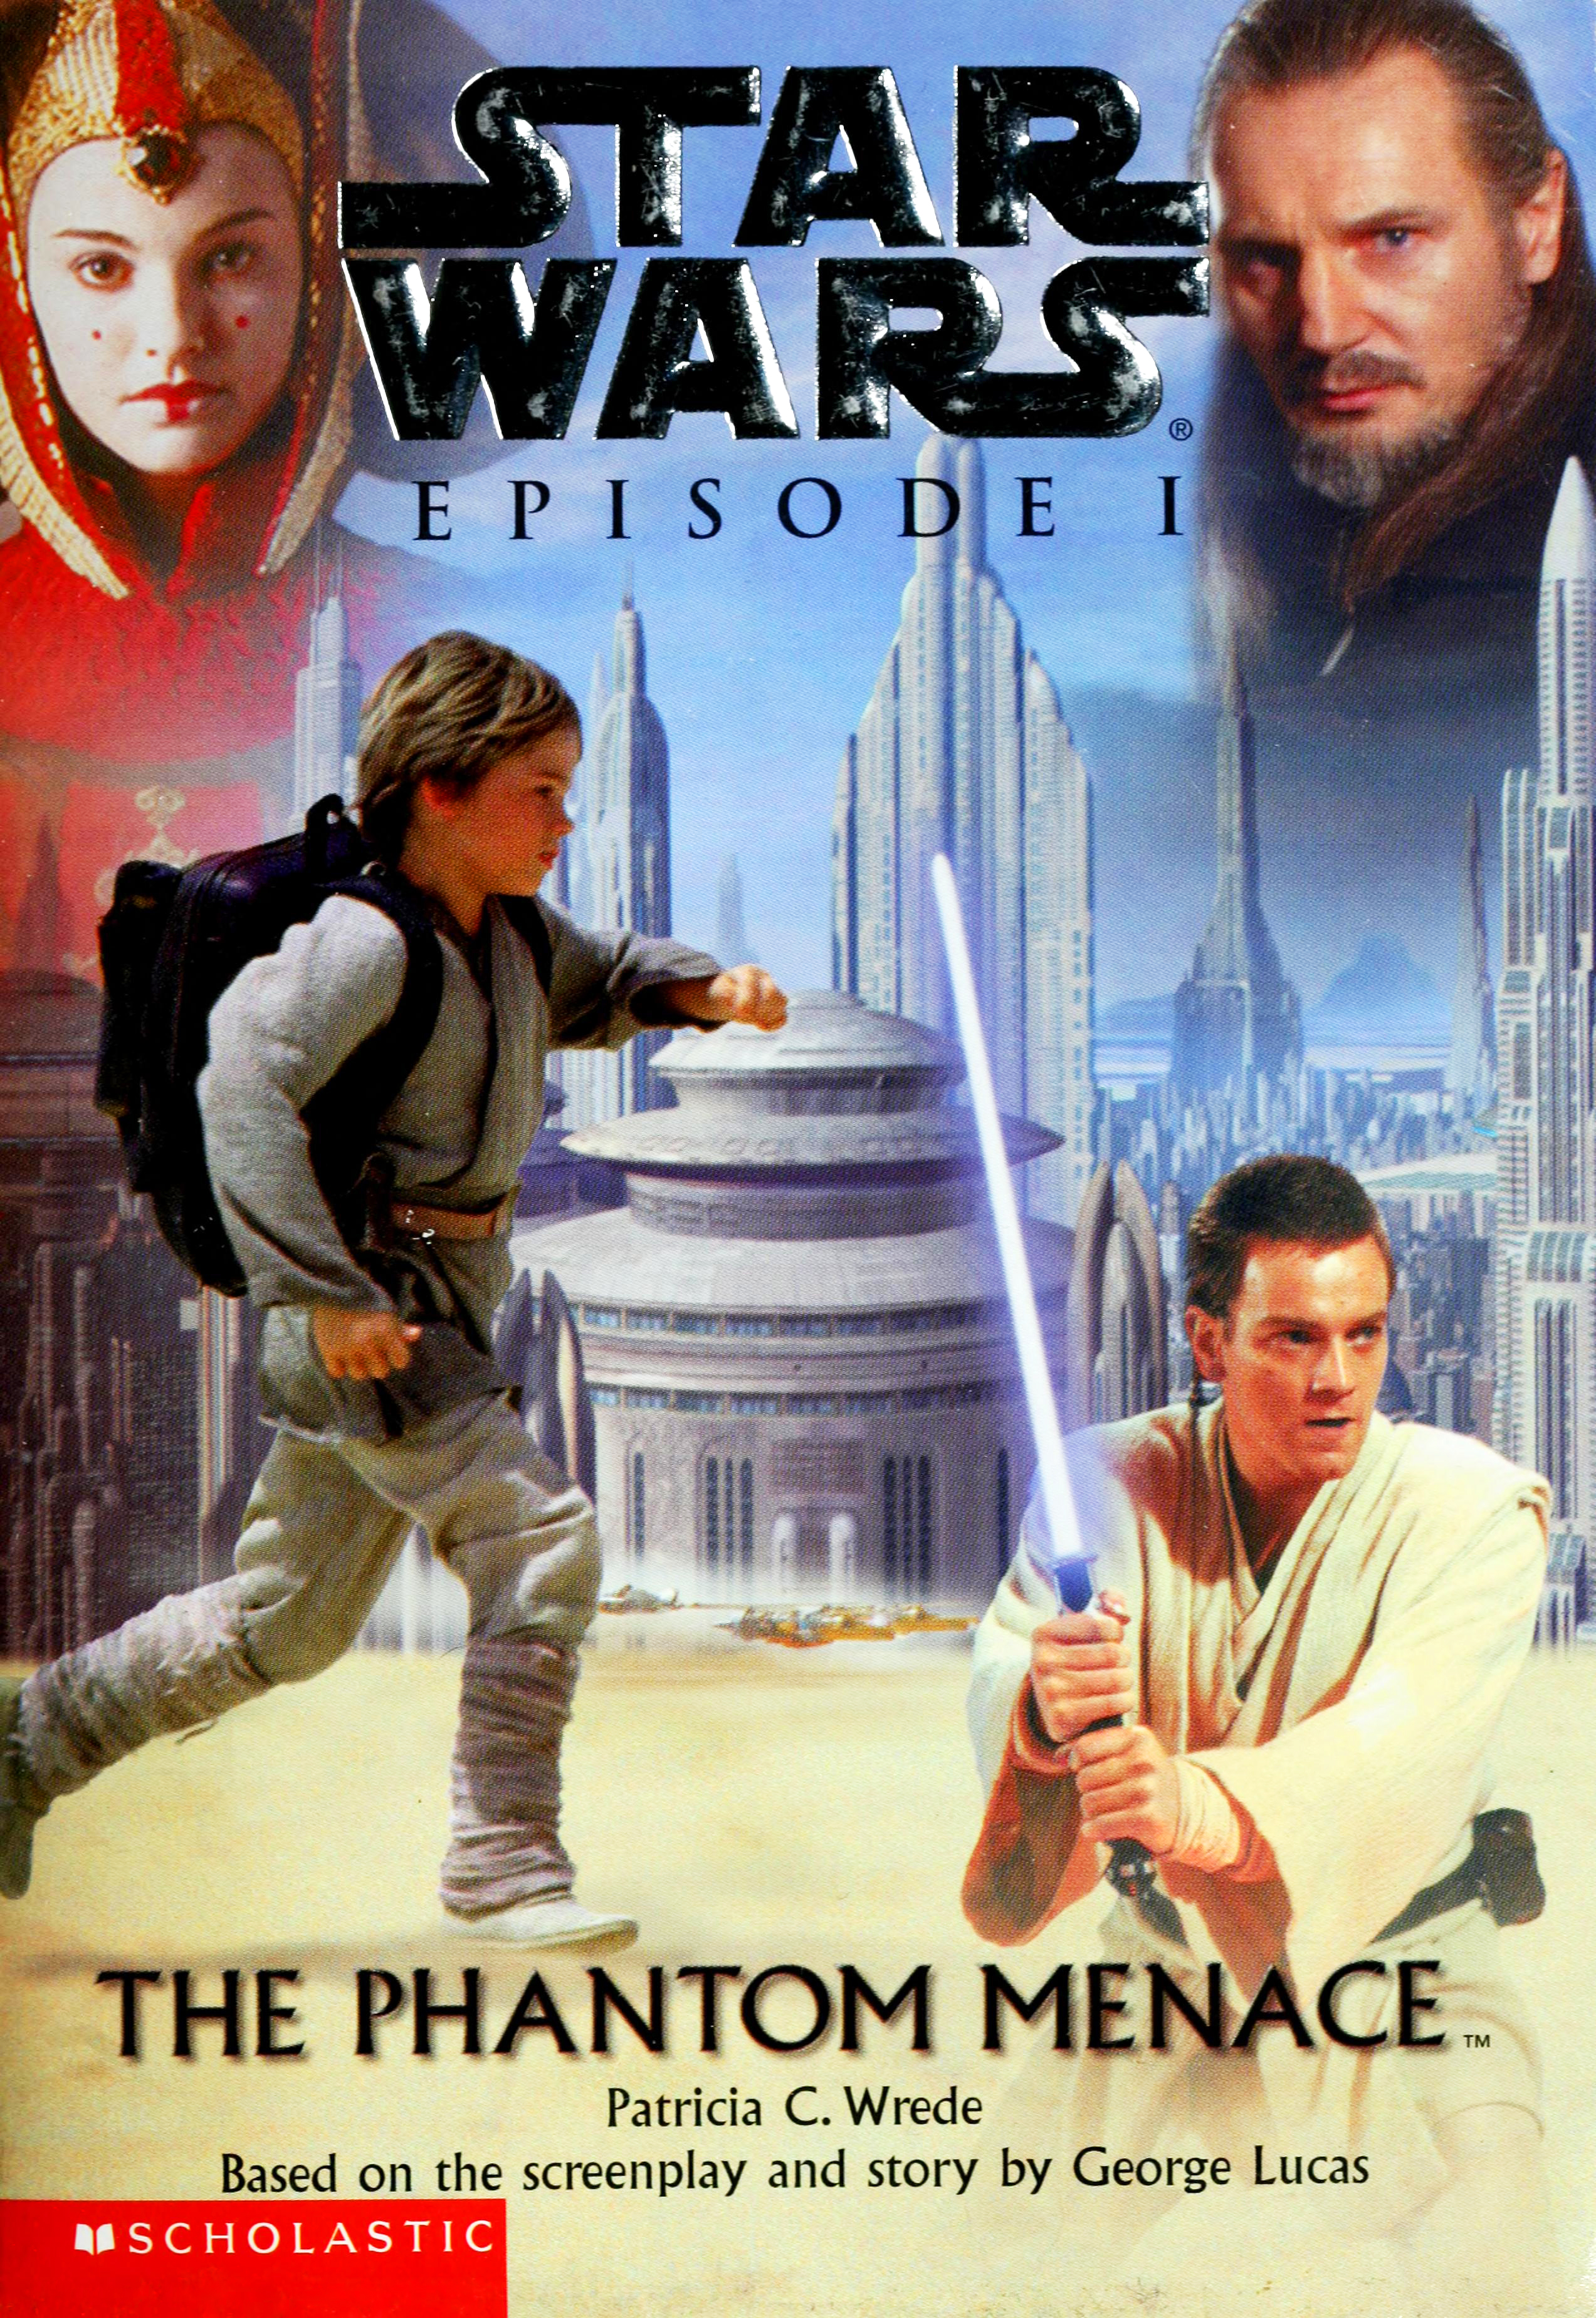 Star Wars Ep. I: The Phantom Menace download the new version for android